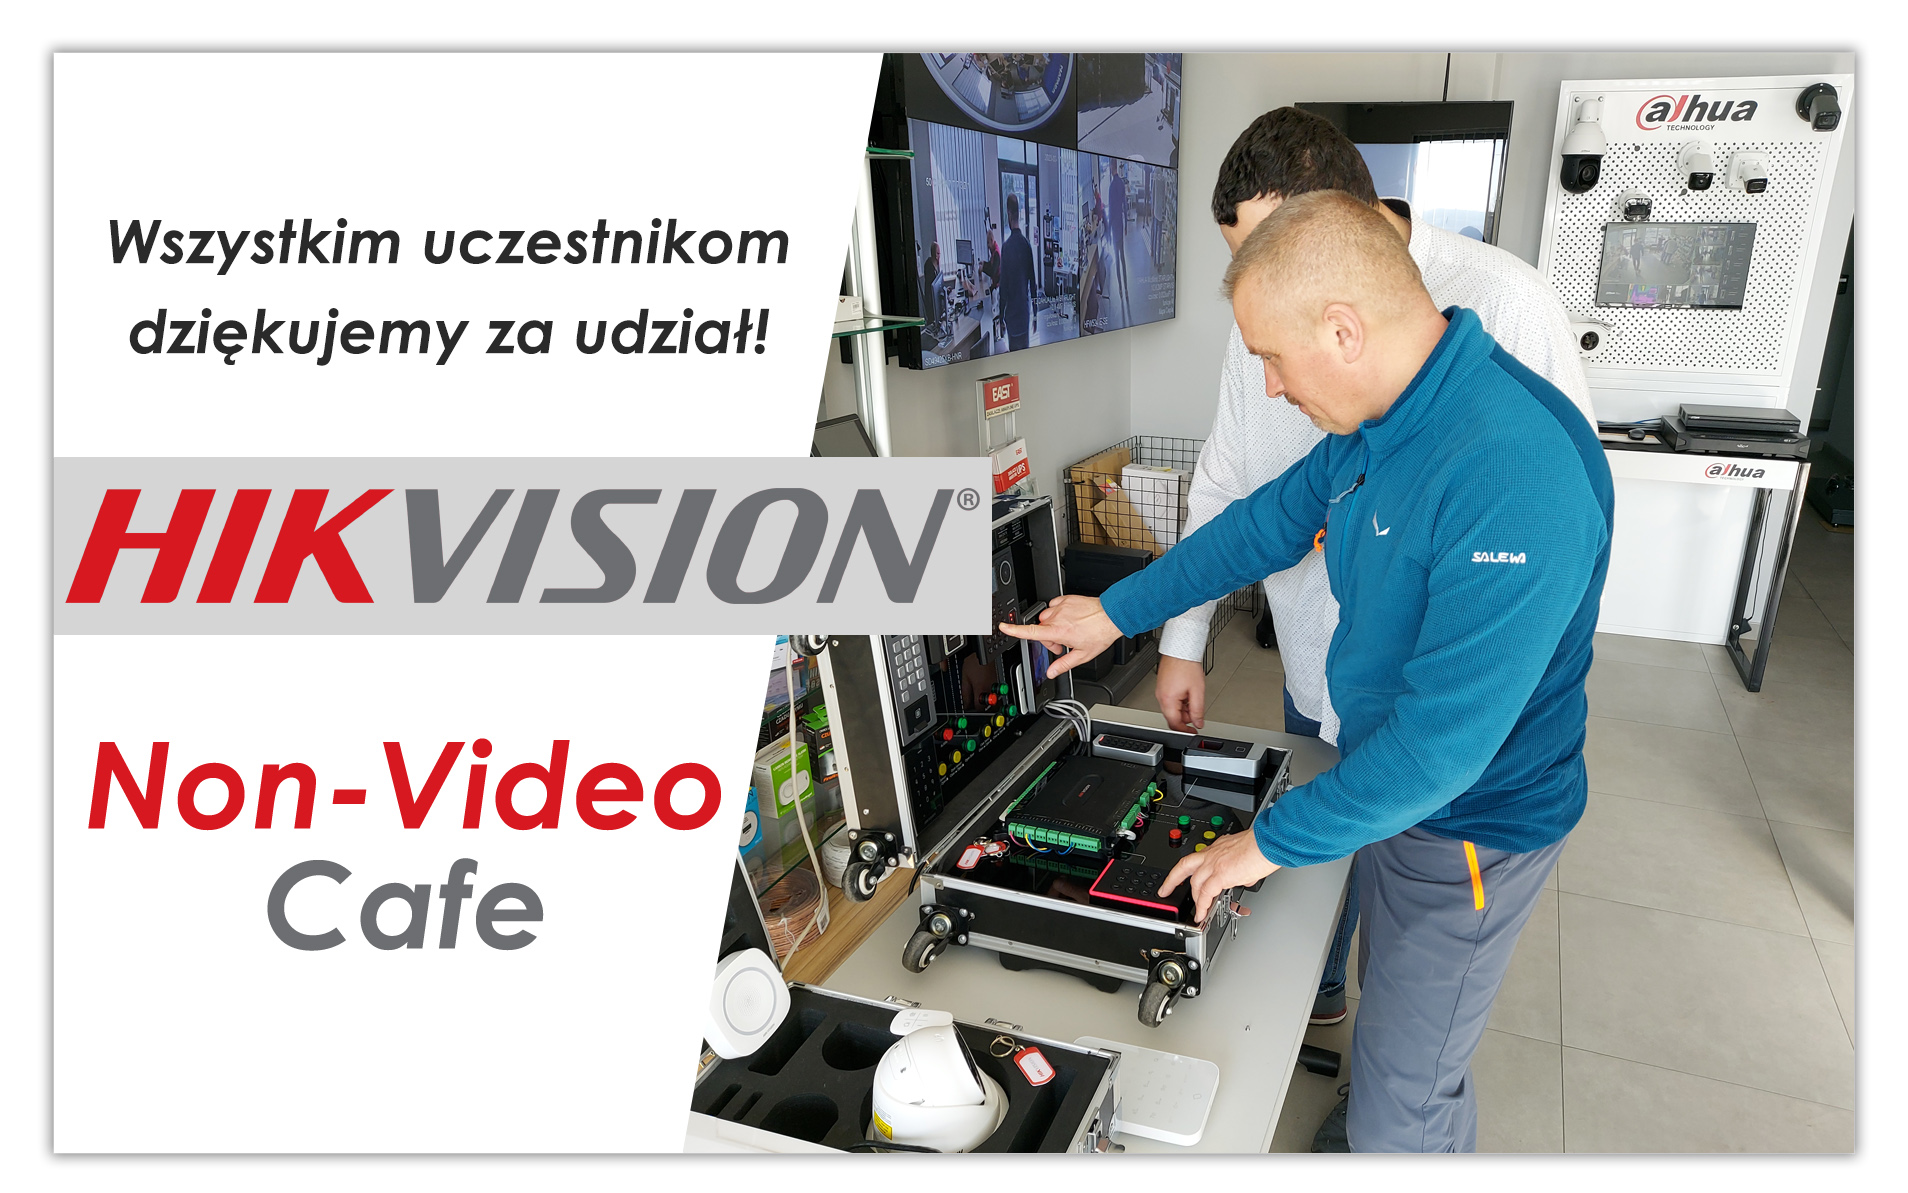 Non-Video Cafe Hikvision